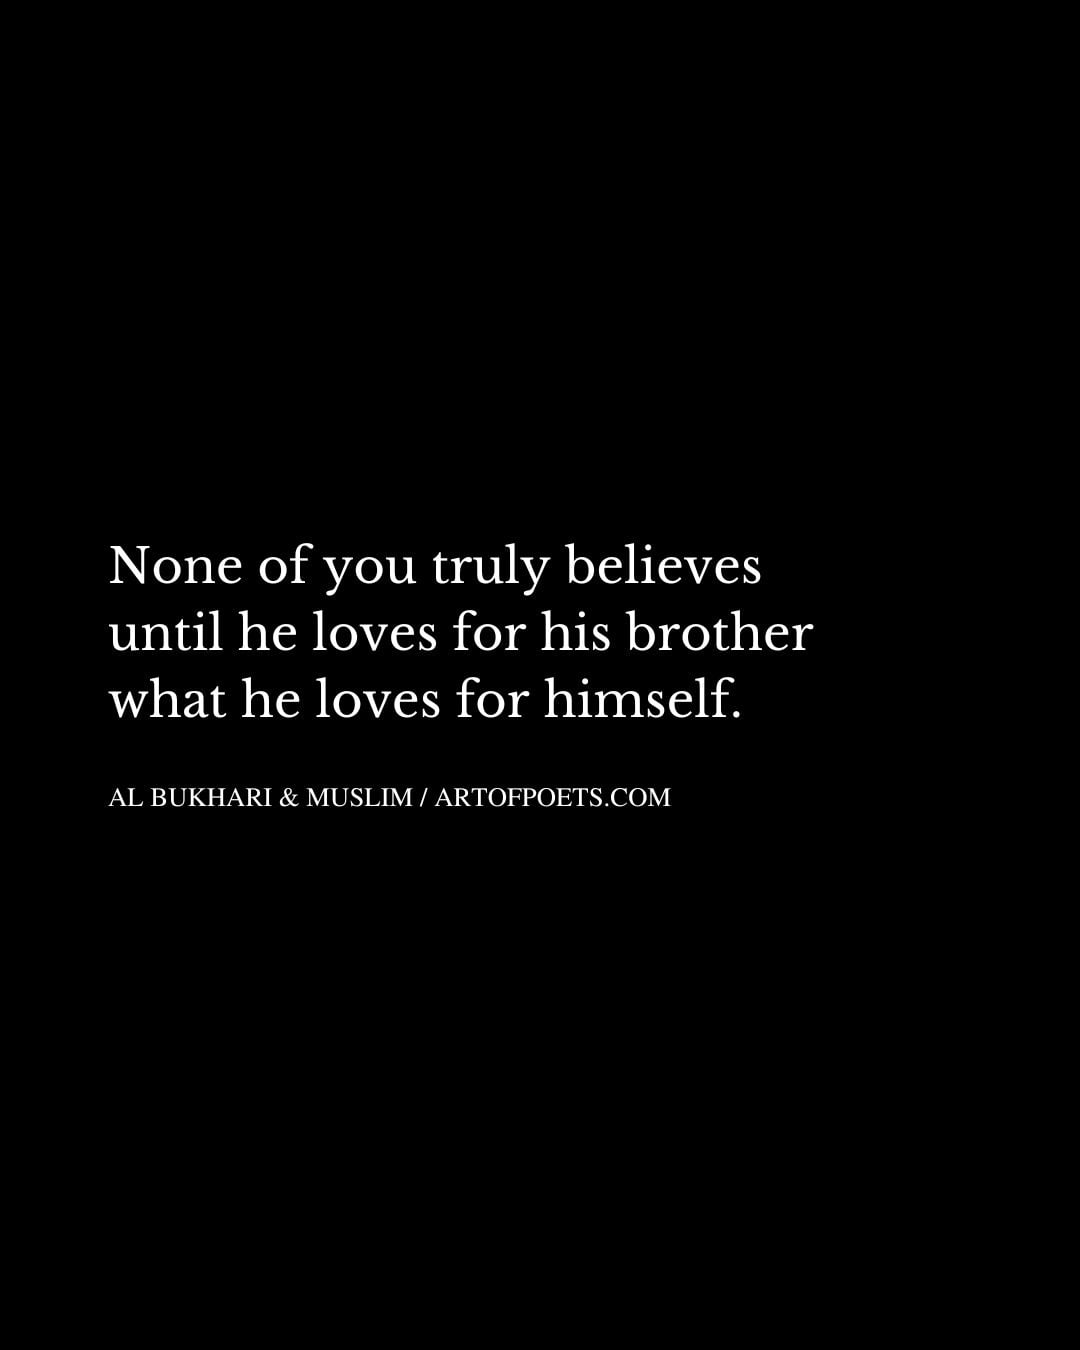 None of you truly believes until he loves for his brother what he loves for himself